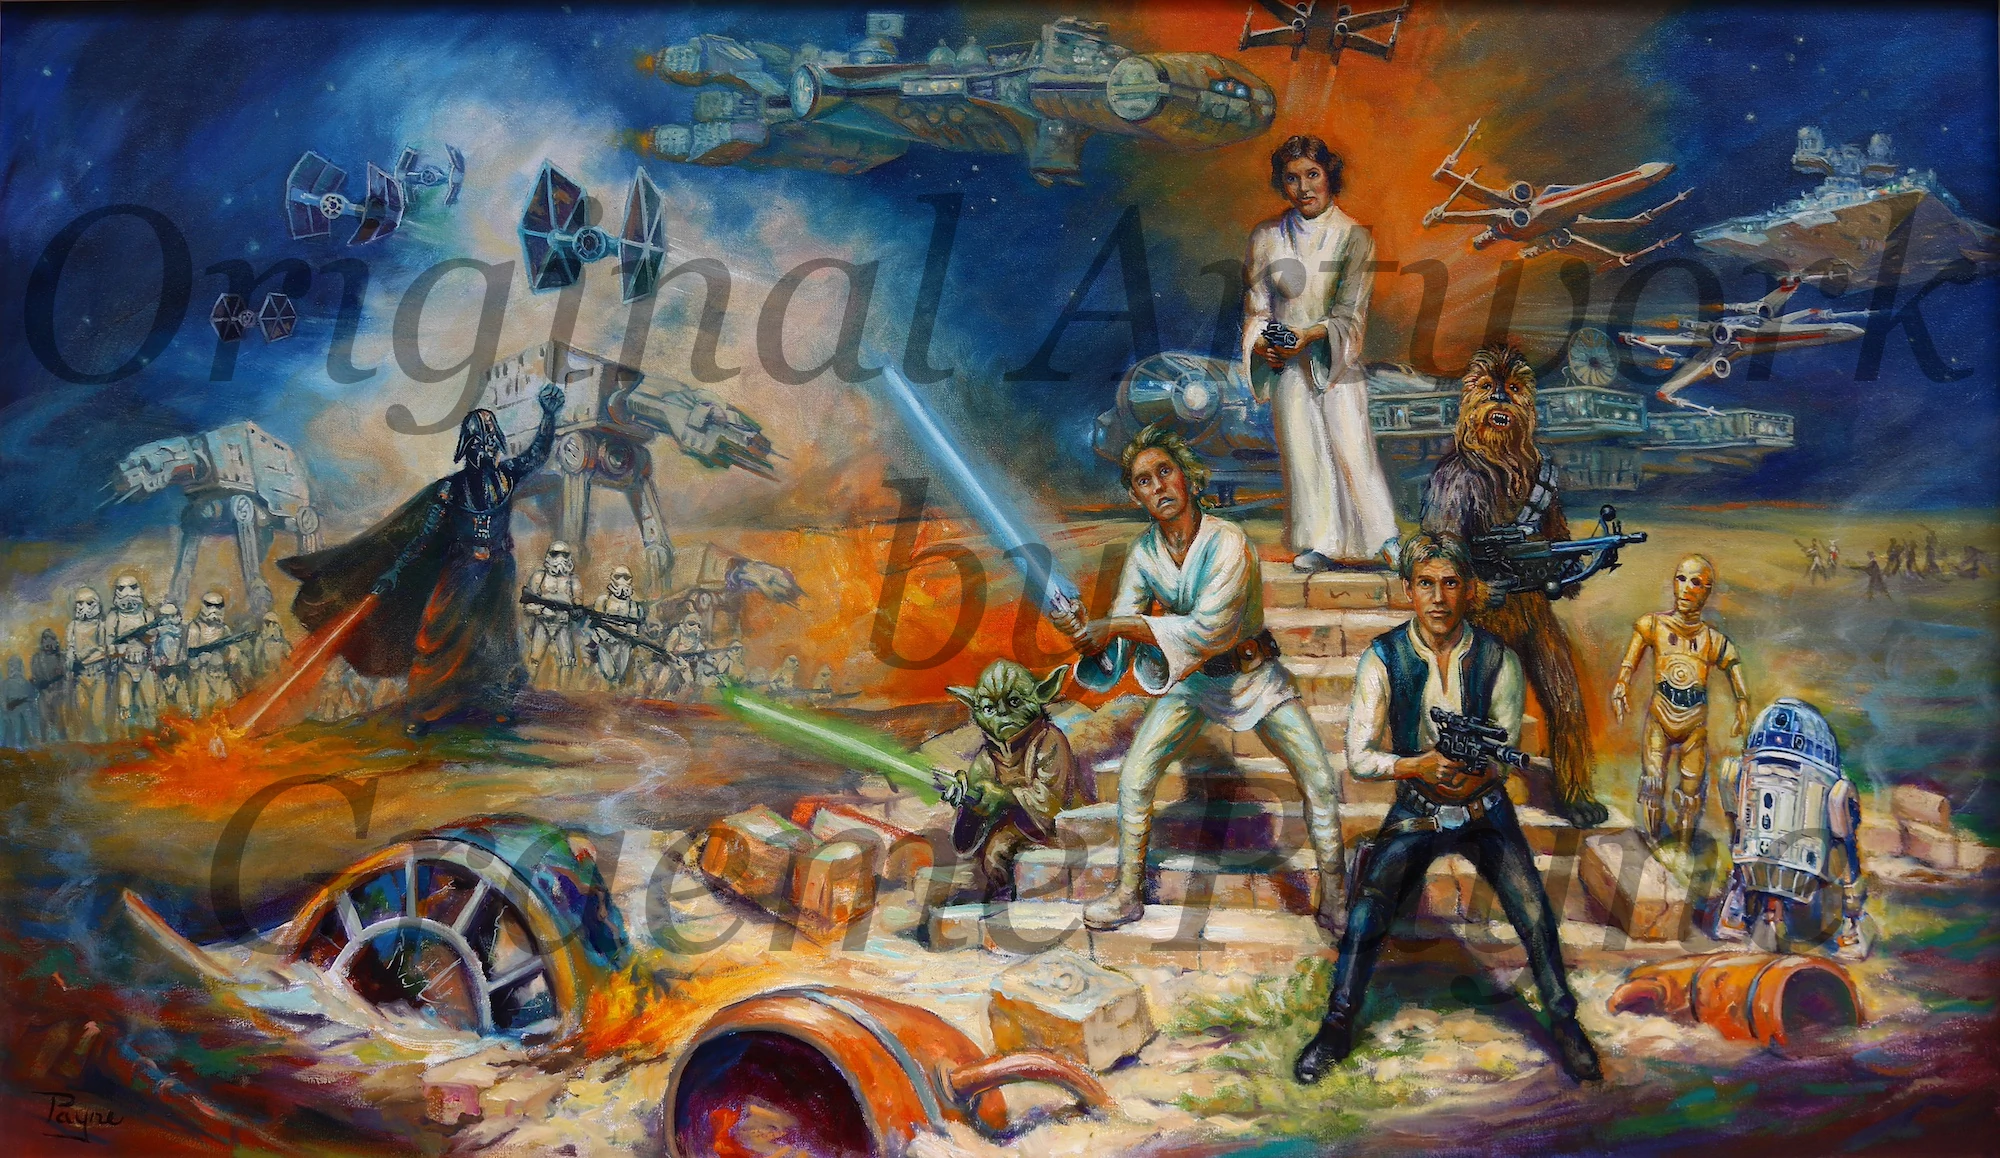 Starwars themed painting by New South Wales artist Graeme Payne